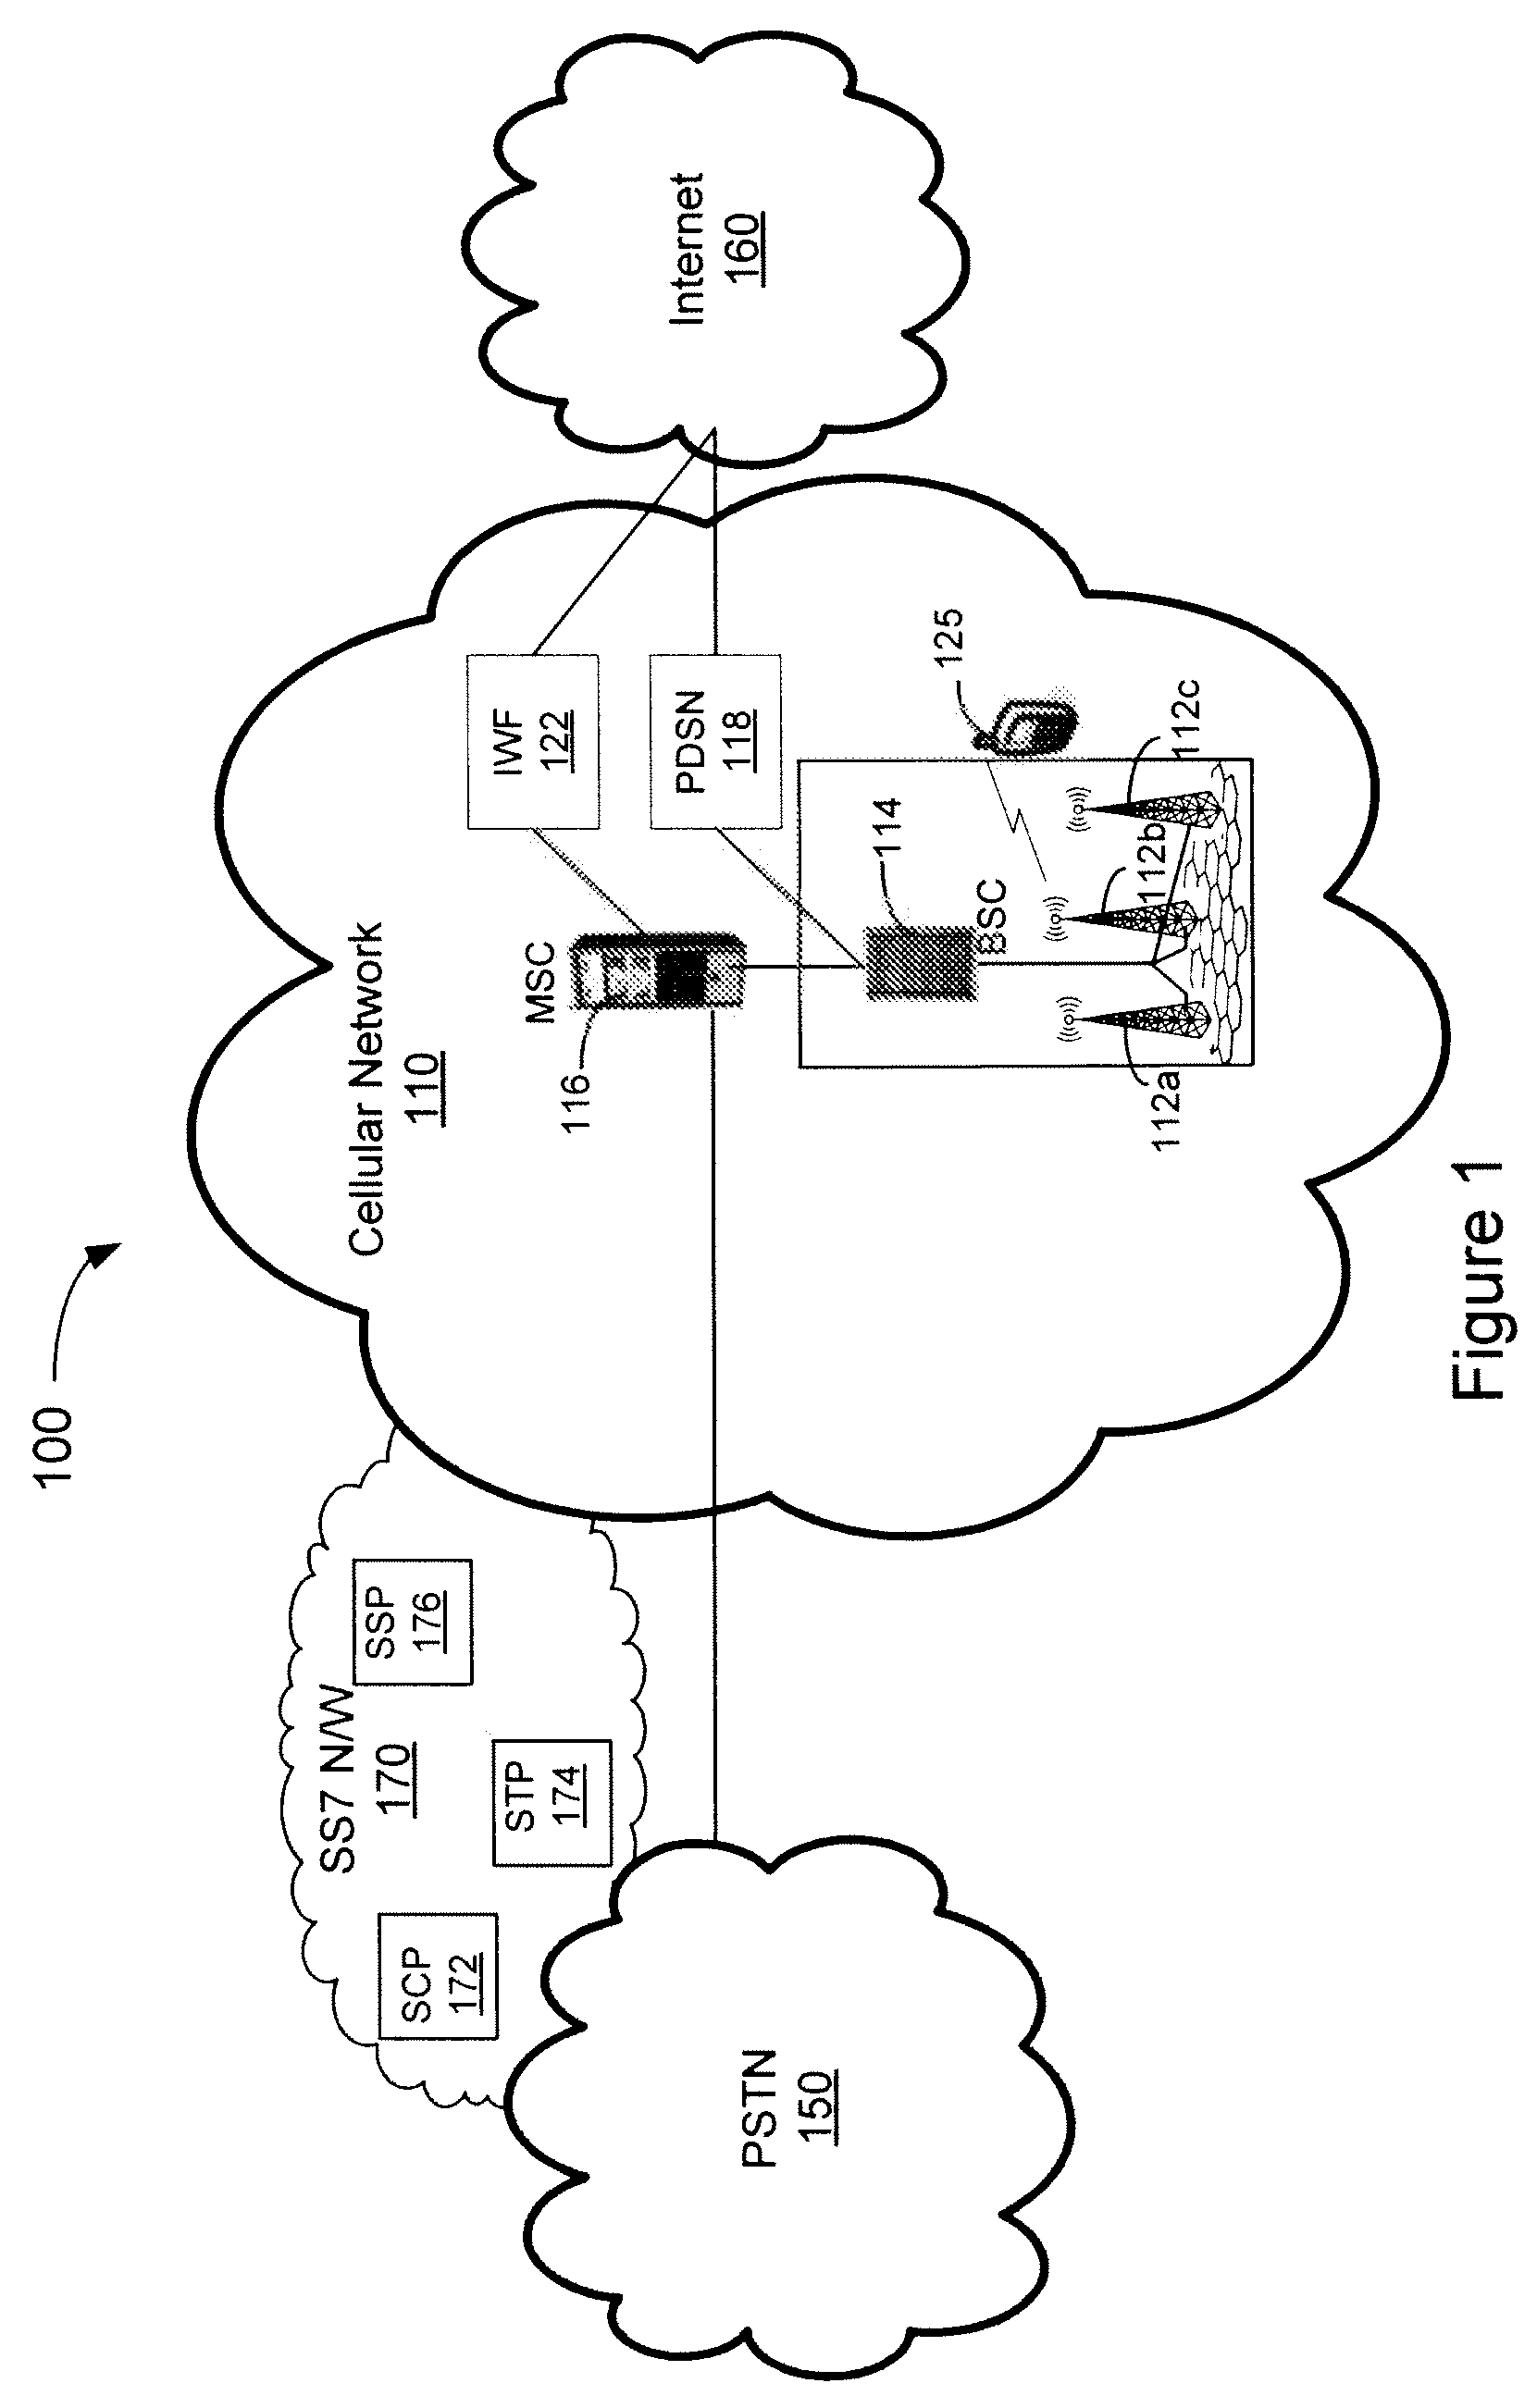 System, method, and computer-readable medium for user equipment registration and authentication processing by a femtocell system